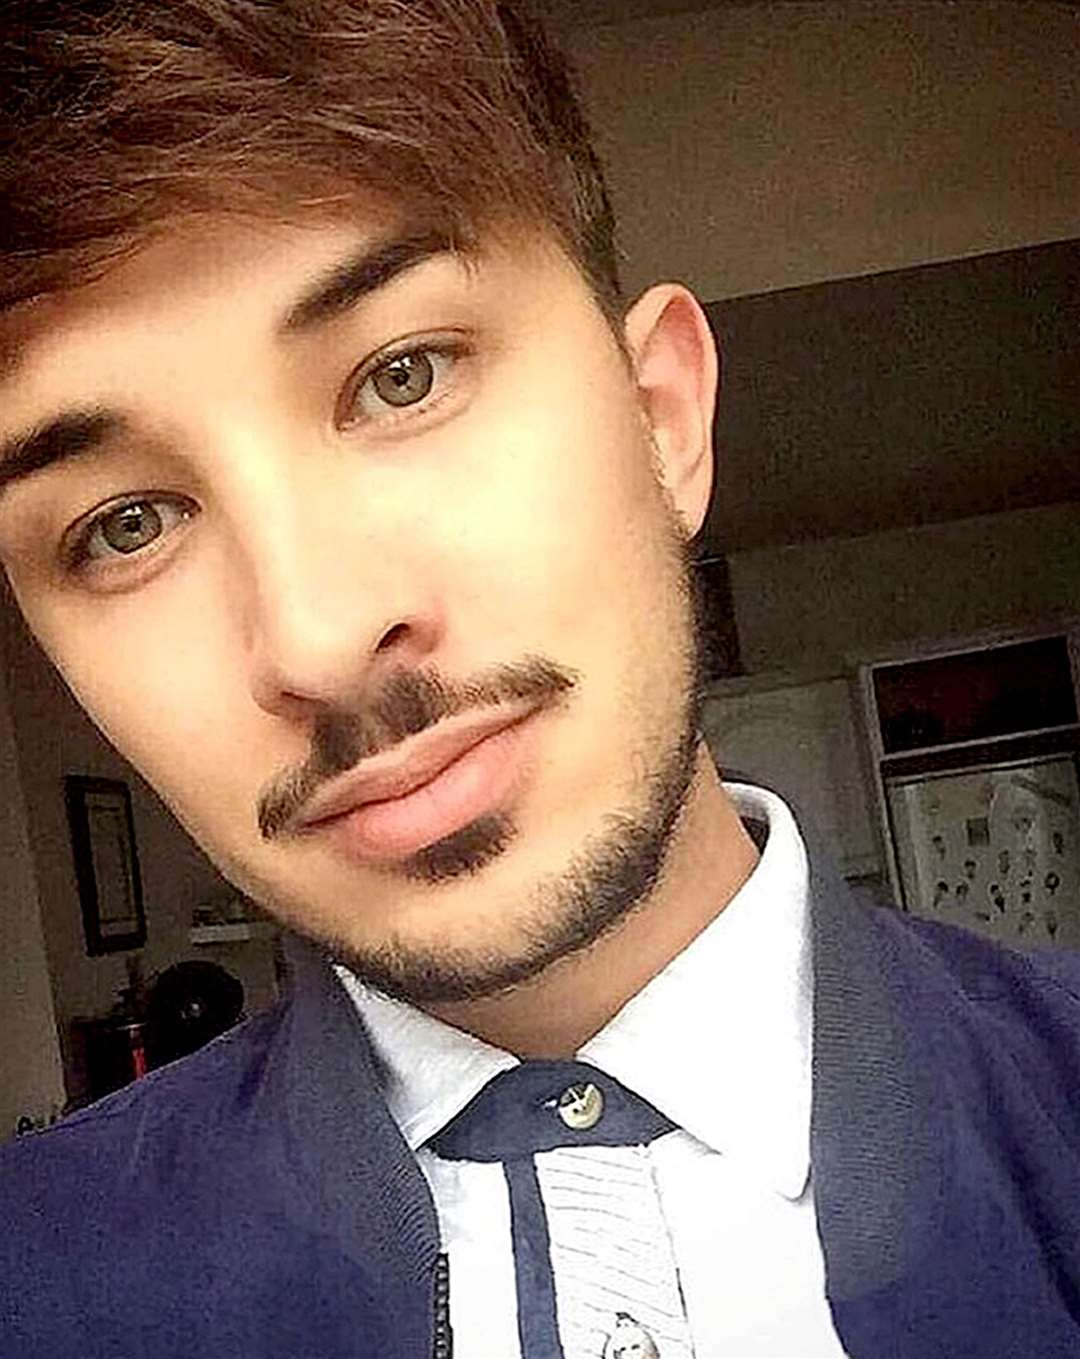 Martyn Hett was among the 22 killed in the Manchester Arena terror attack (Family handout/PA).